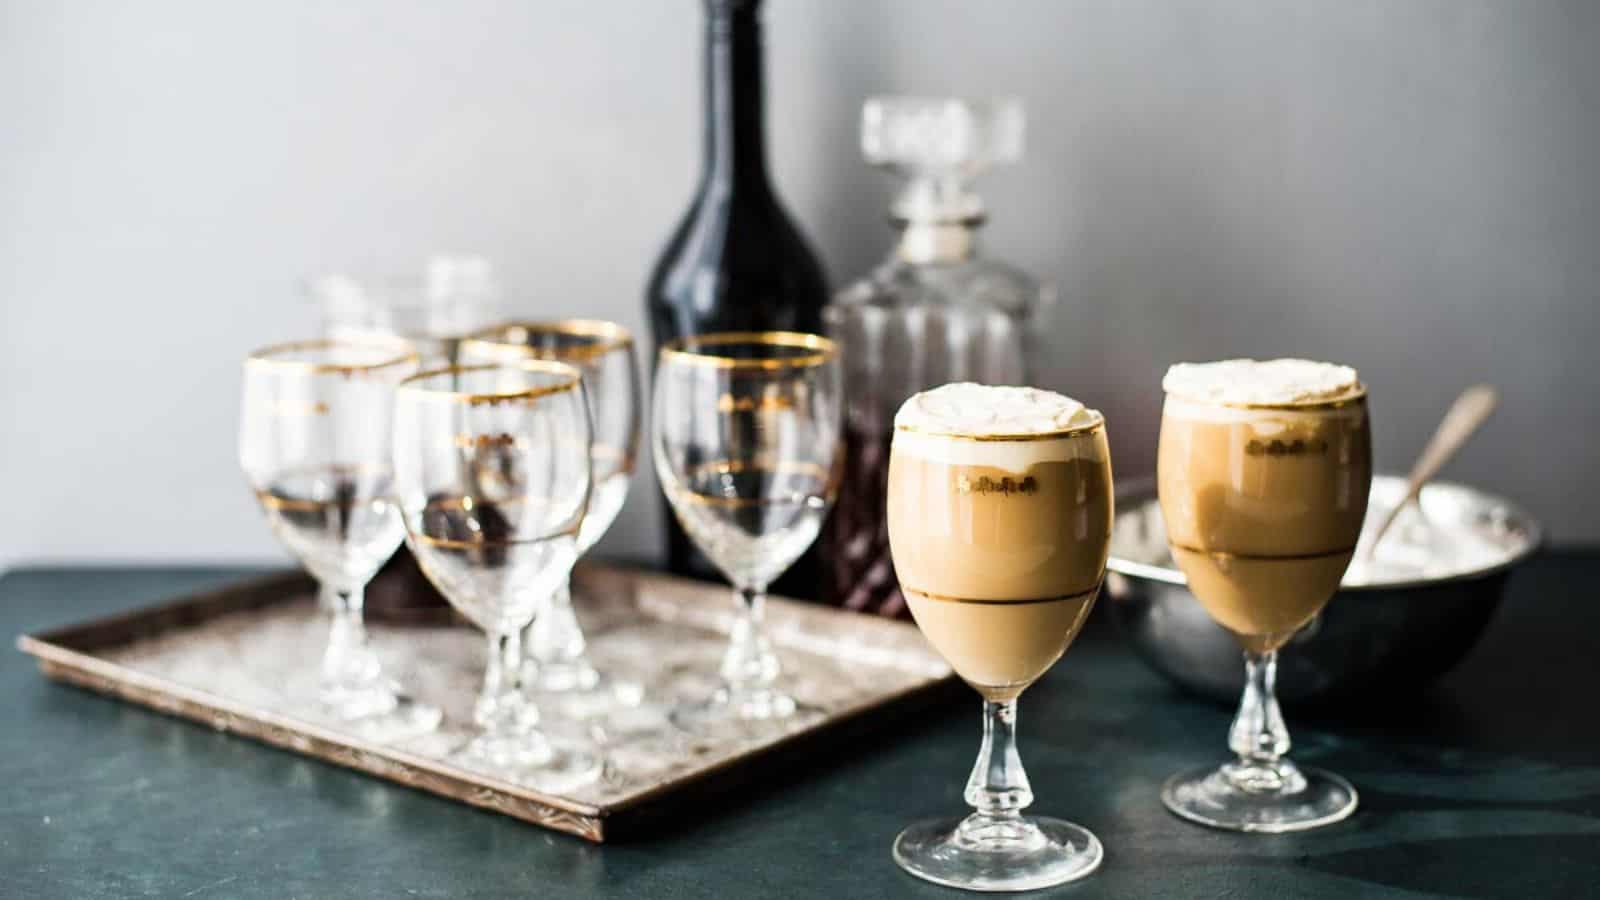 Two glasses of Irish Cream coffee in front of a tray of festive glass and a bar set up for making more.